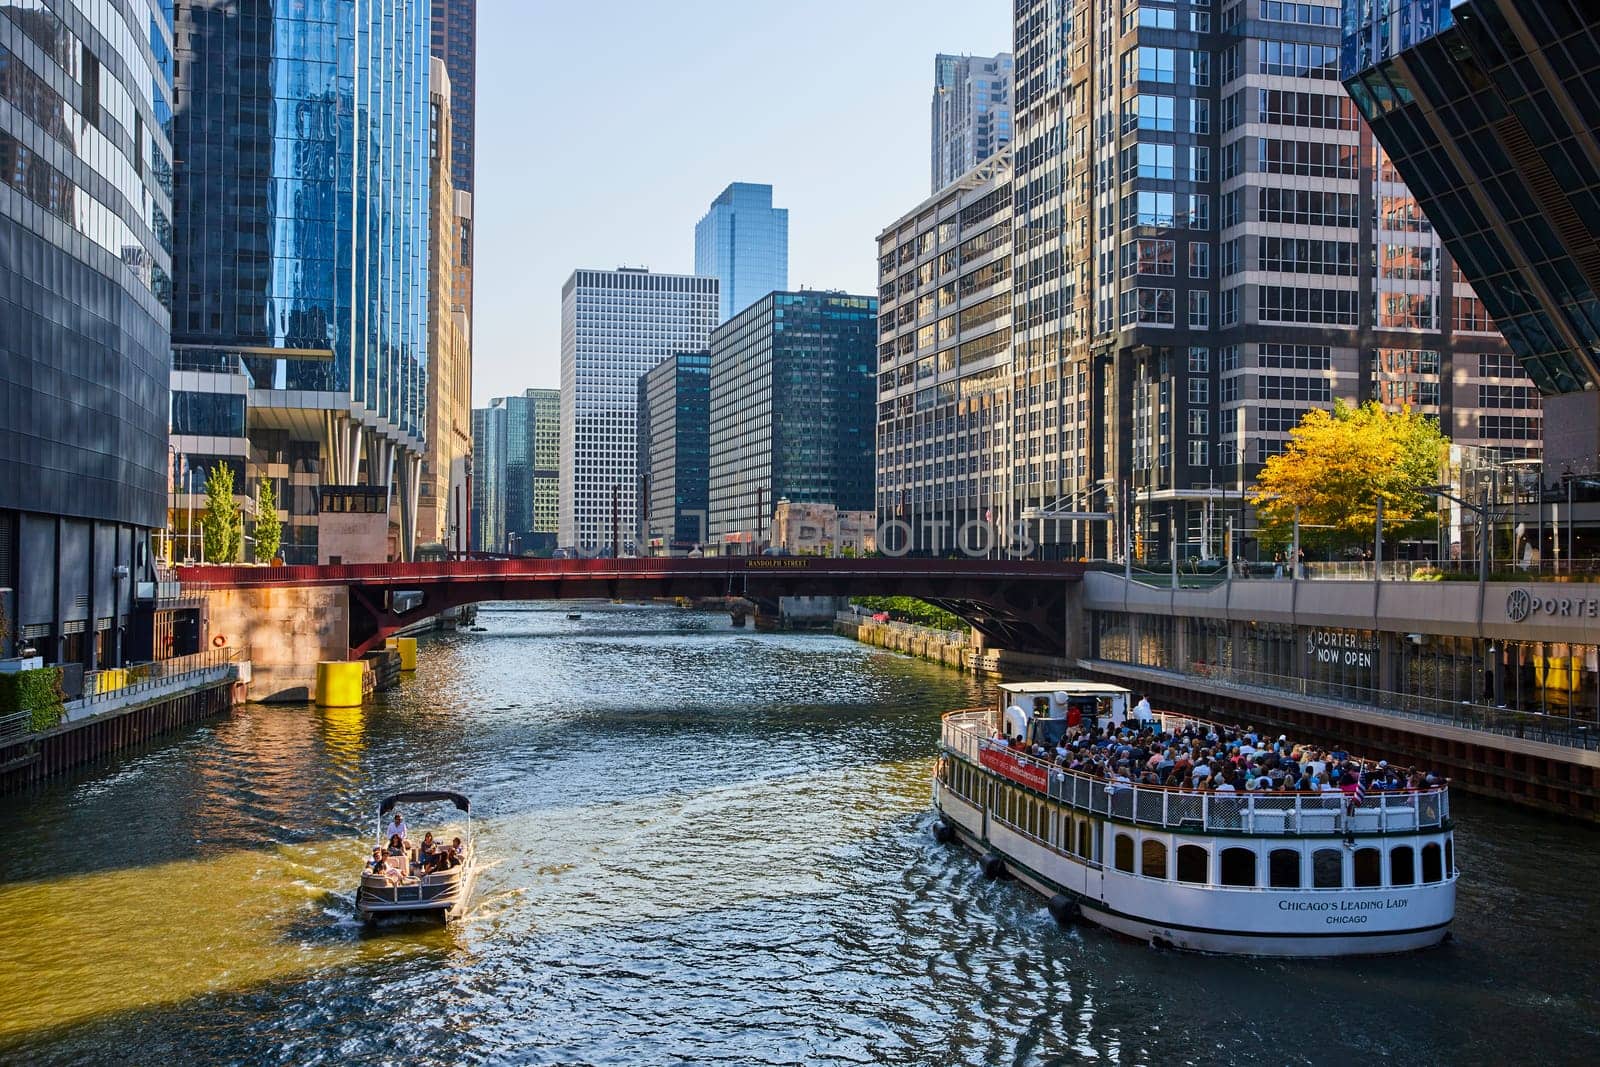 Image of Tourists on white boat beside smaller vessel on Chicago canal waterway with skyscrapers, summer day